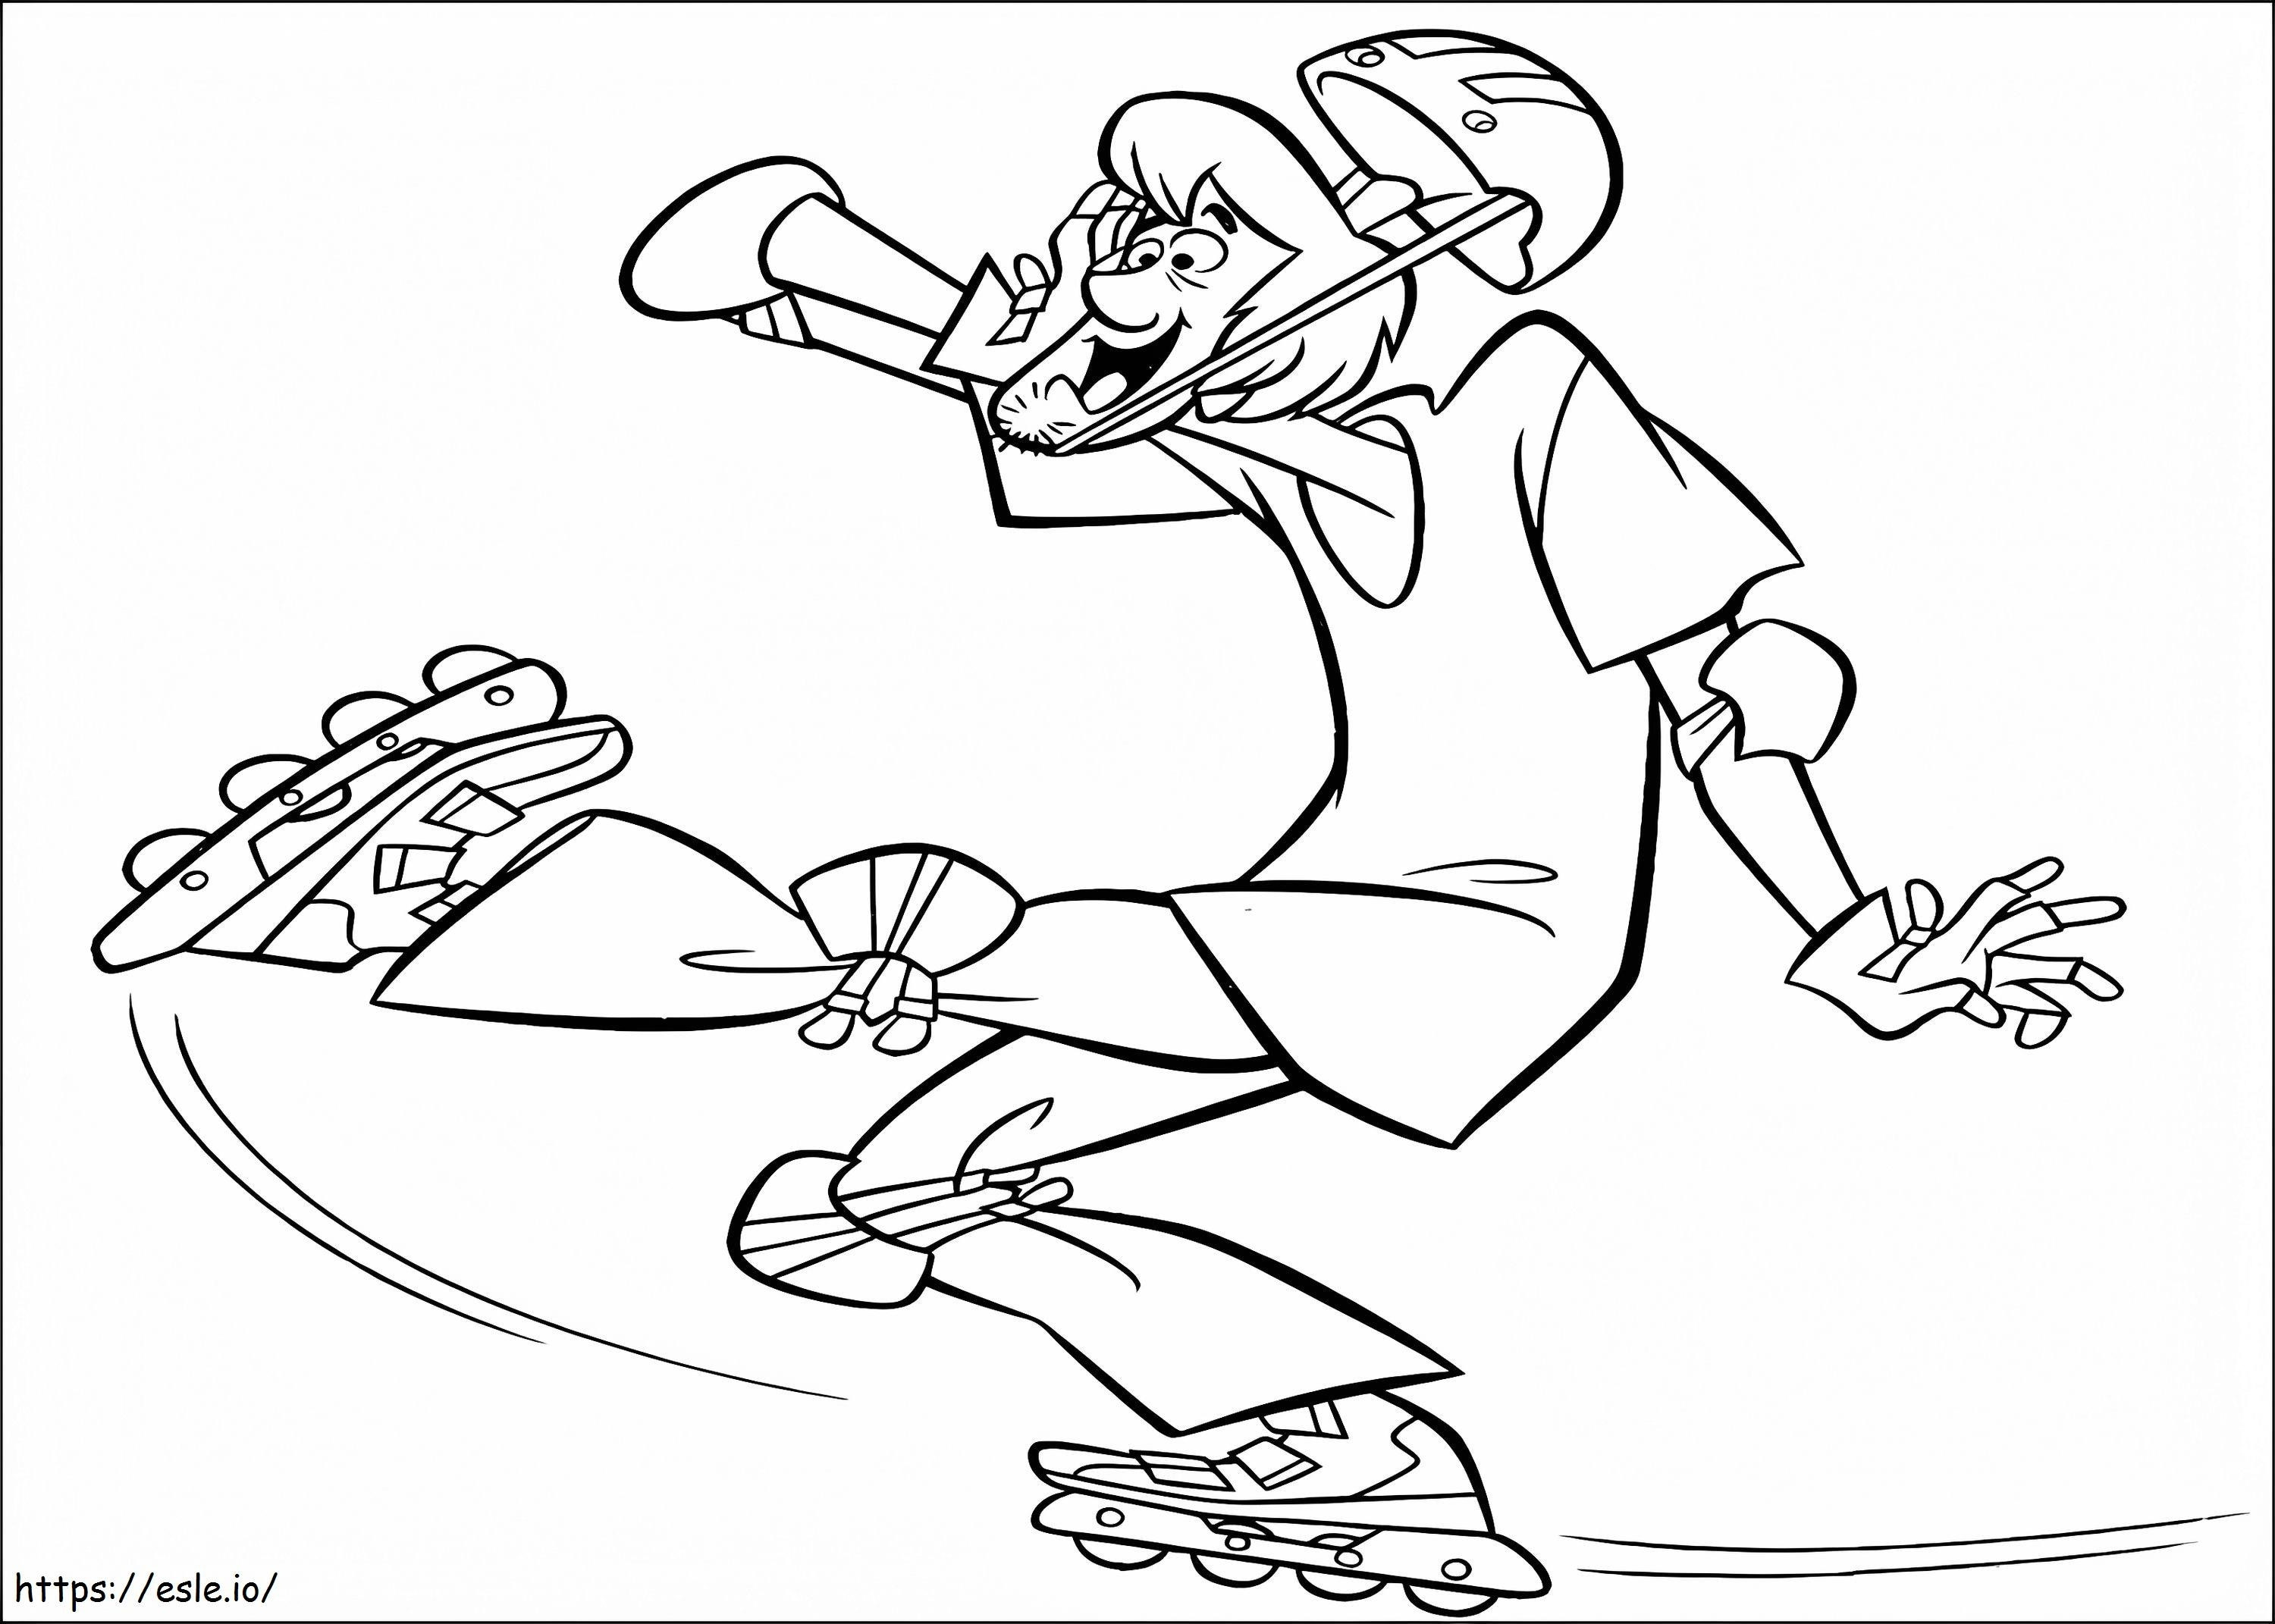 Shaggy Rollerblading A4 E1624007474790 coloring page